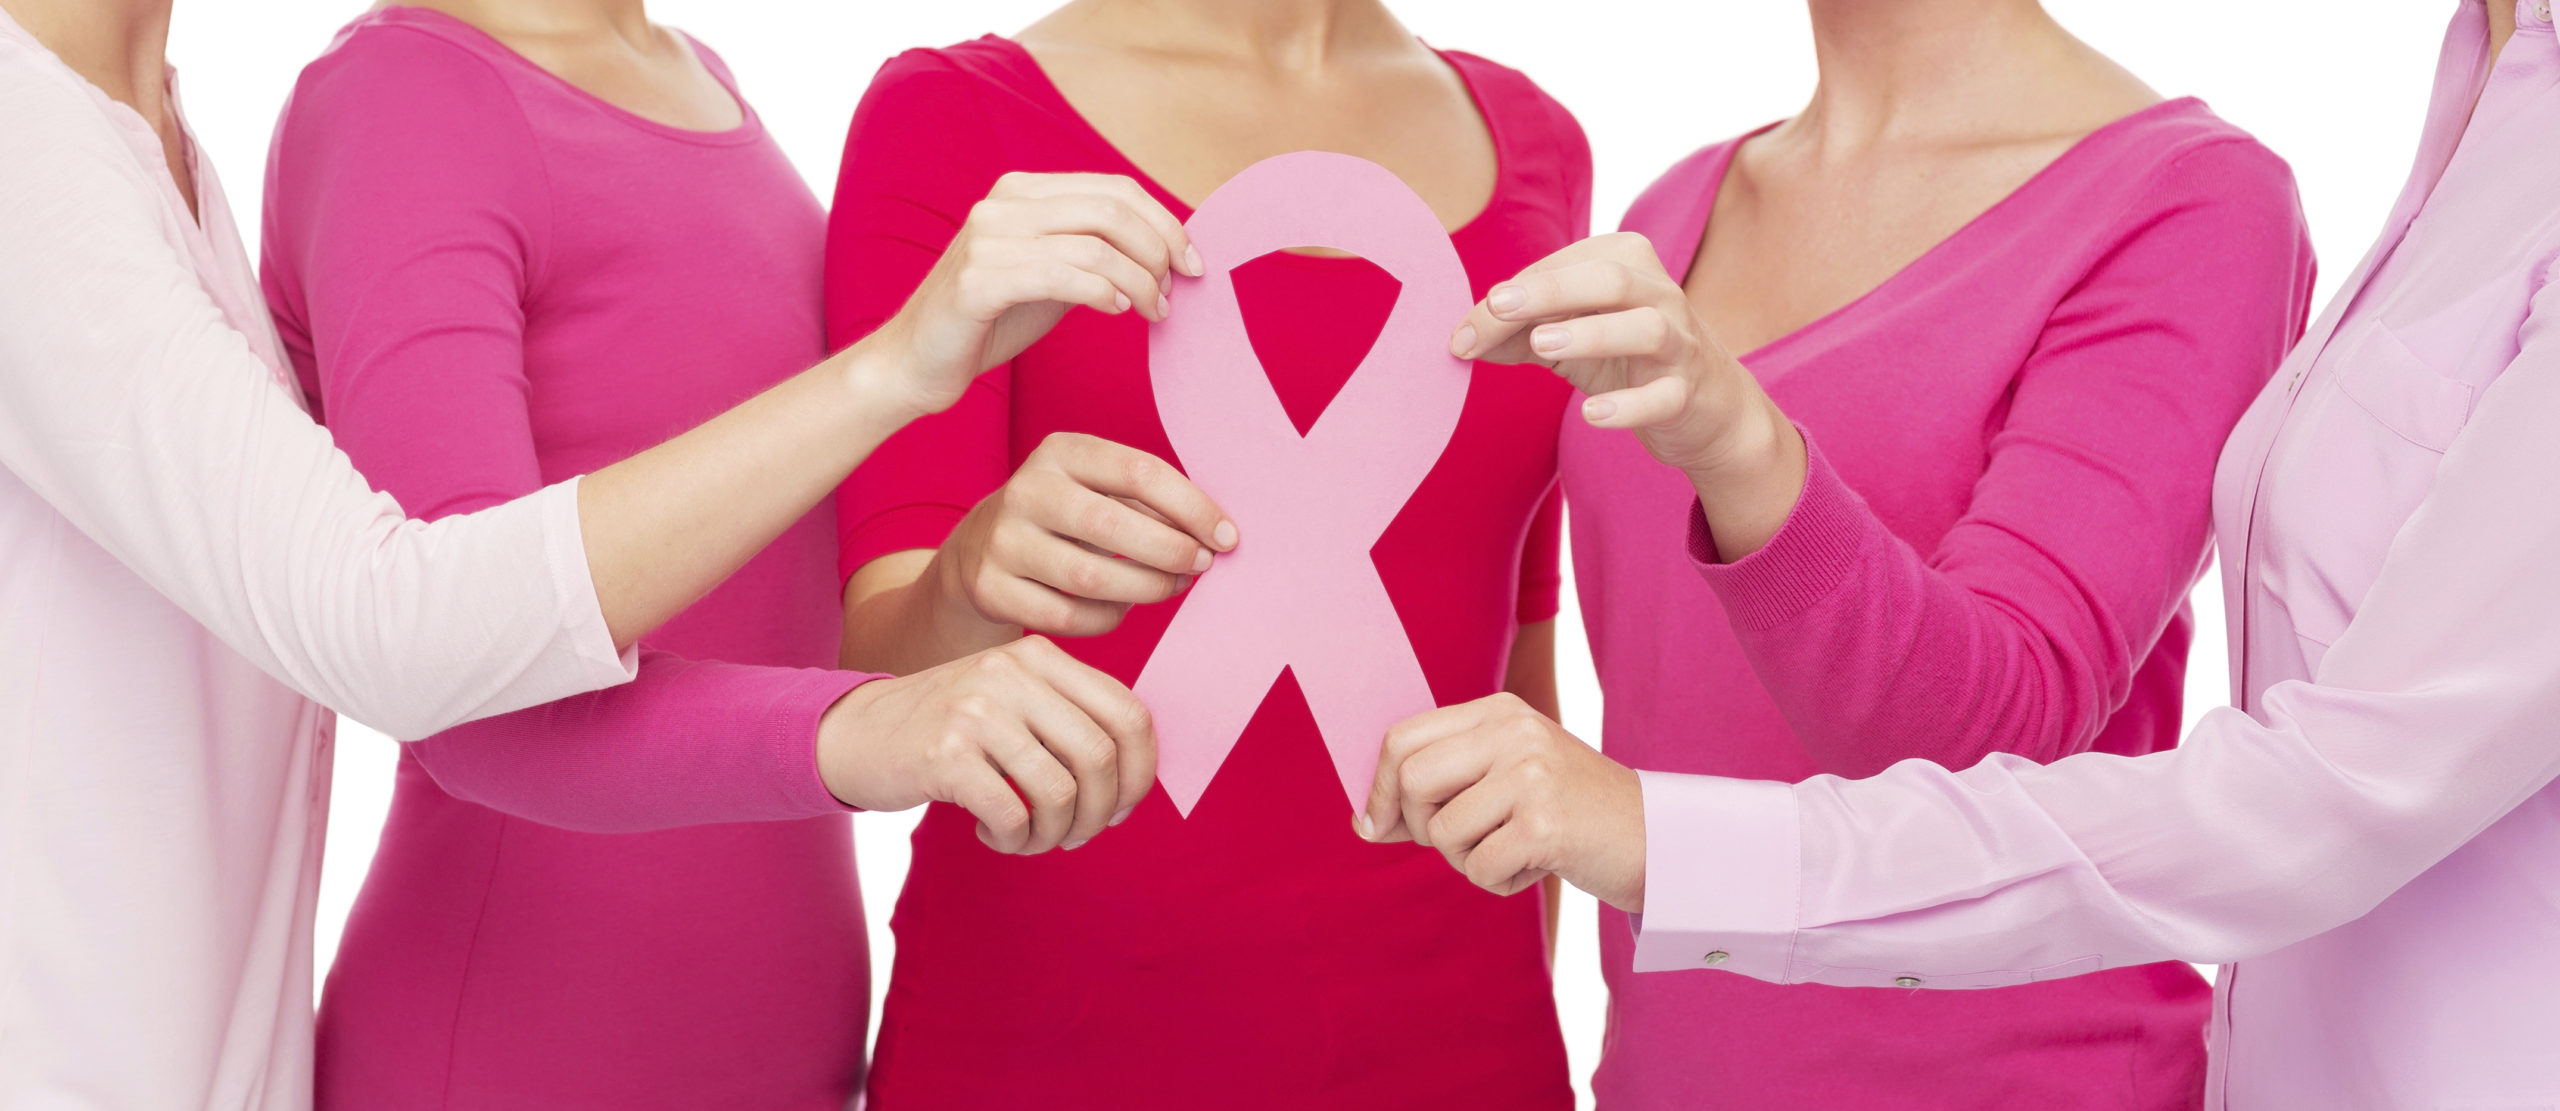 Women with pink breast cancer awareness ribbon supporting awareness of breast cancer.